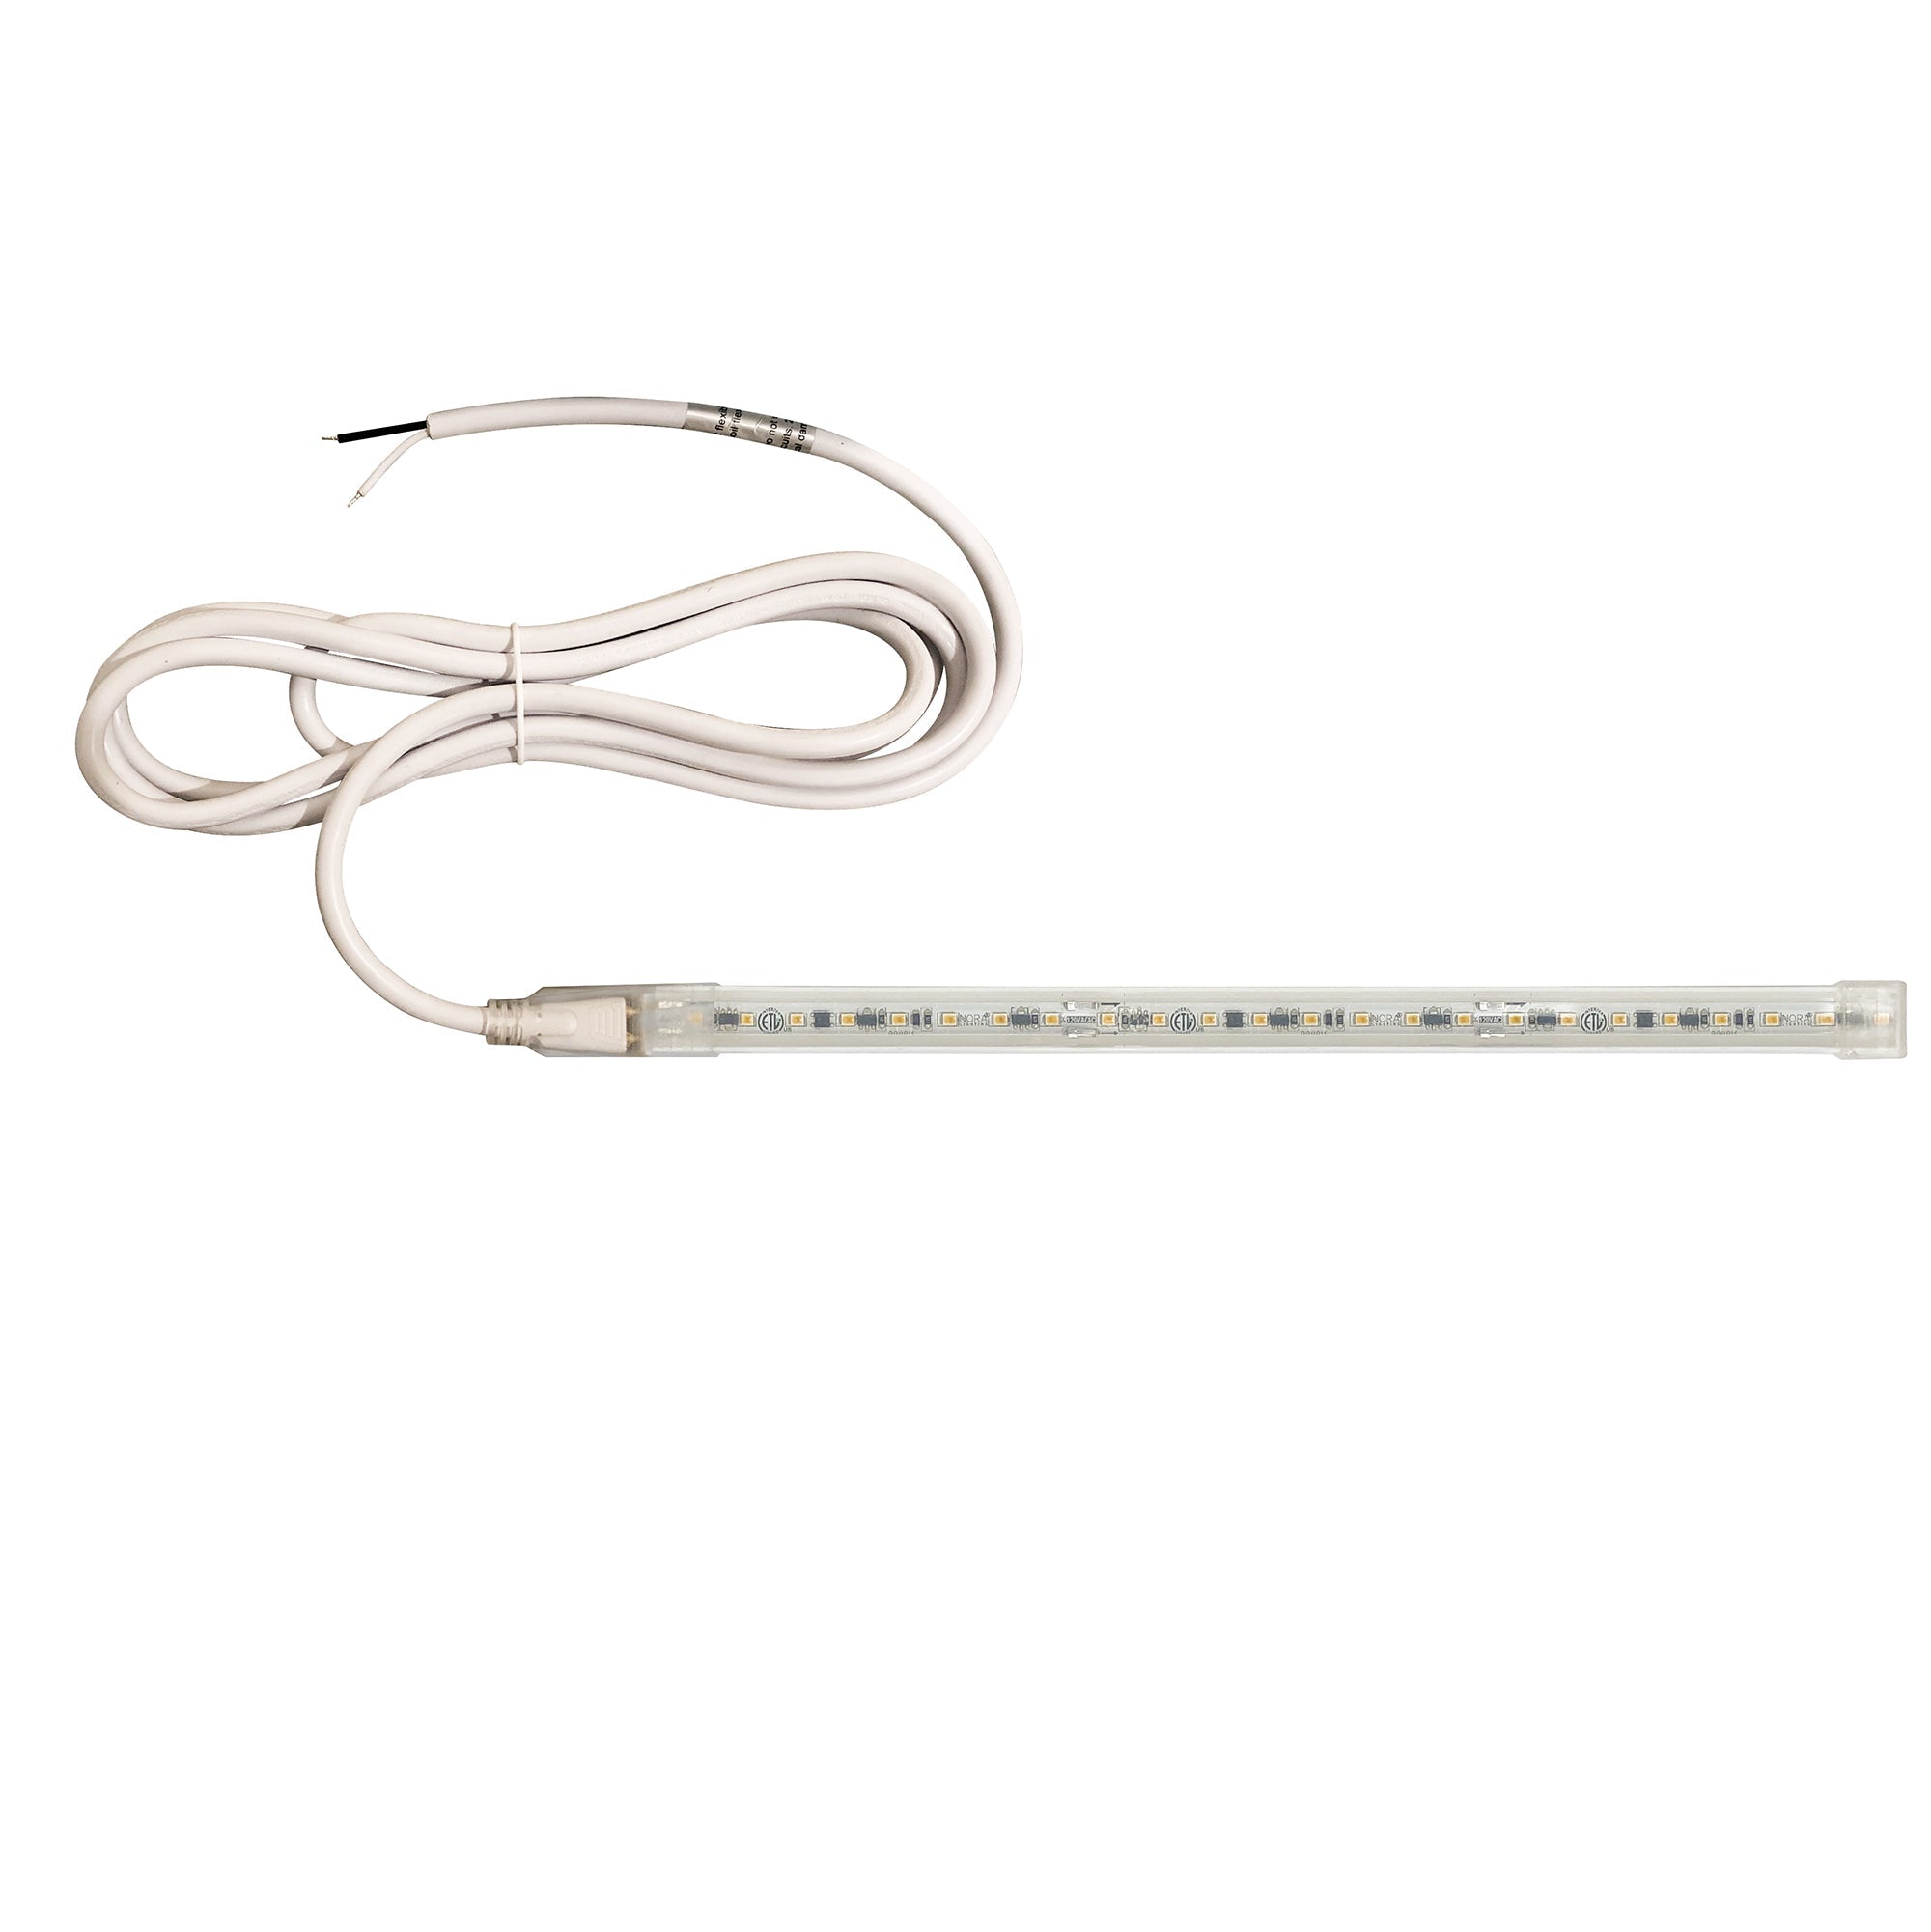 Nora Lighting NUTP13-W11-8-12-930/HW - Accent / Undercabinet - Custom Cut 11-ft, 8-in 120V Continuous LED Tape Light, 330lm / 3.6W per foot, 3000K, w/ Mounting Clips and 8' Hardwired Power Cord